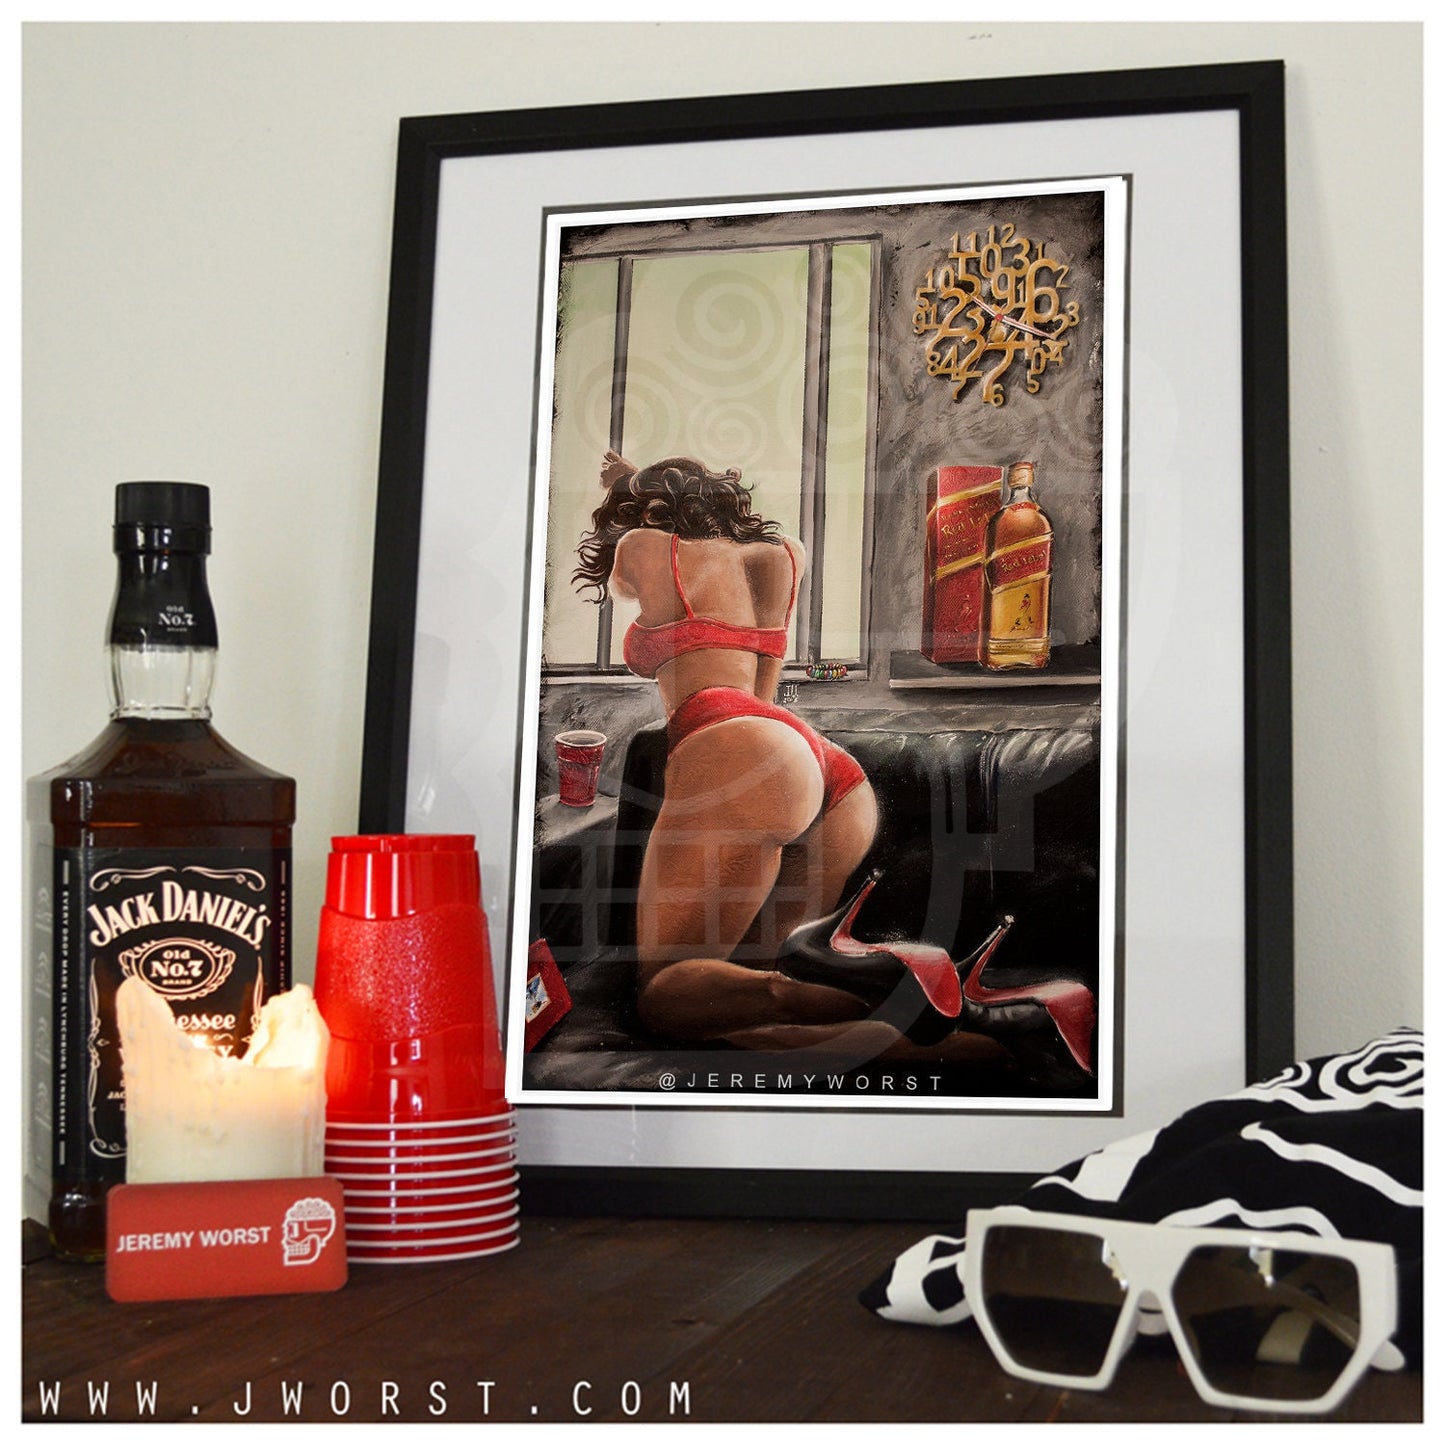 JEREMY WORST On Sight Johnnie Walker Red Label Whiskey Canvas Wall Art Print Poster Decanter Nsfw Nude Gifts for him her Sexy Painting Decor